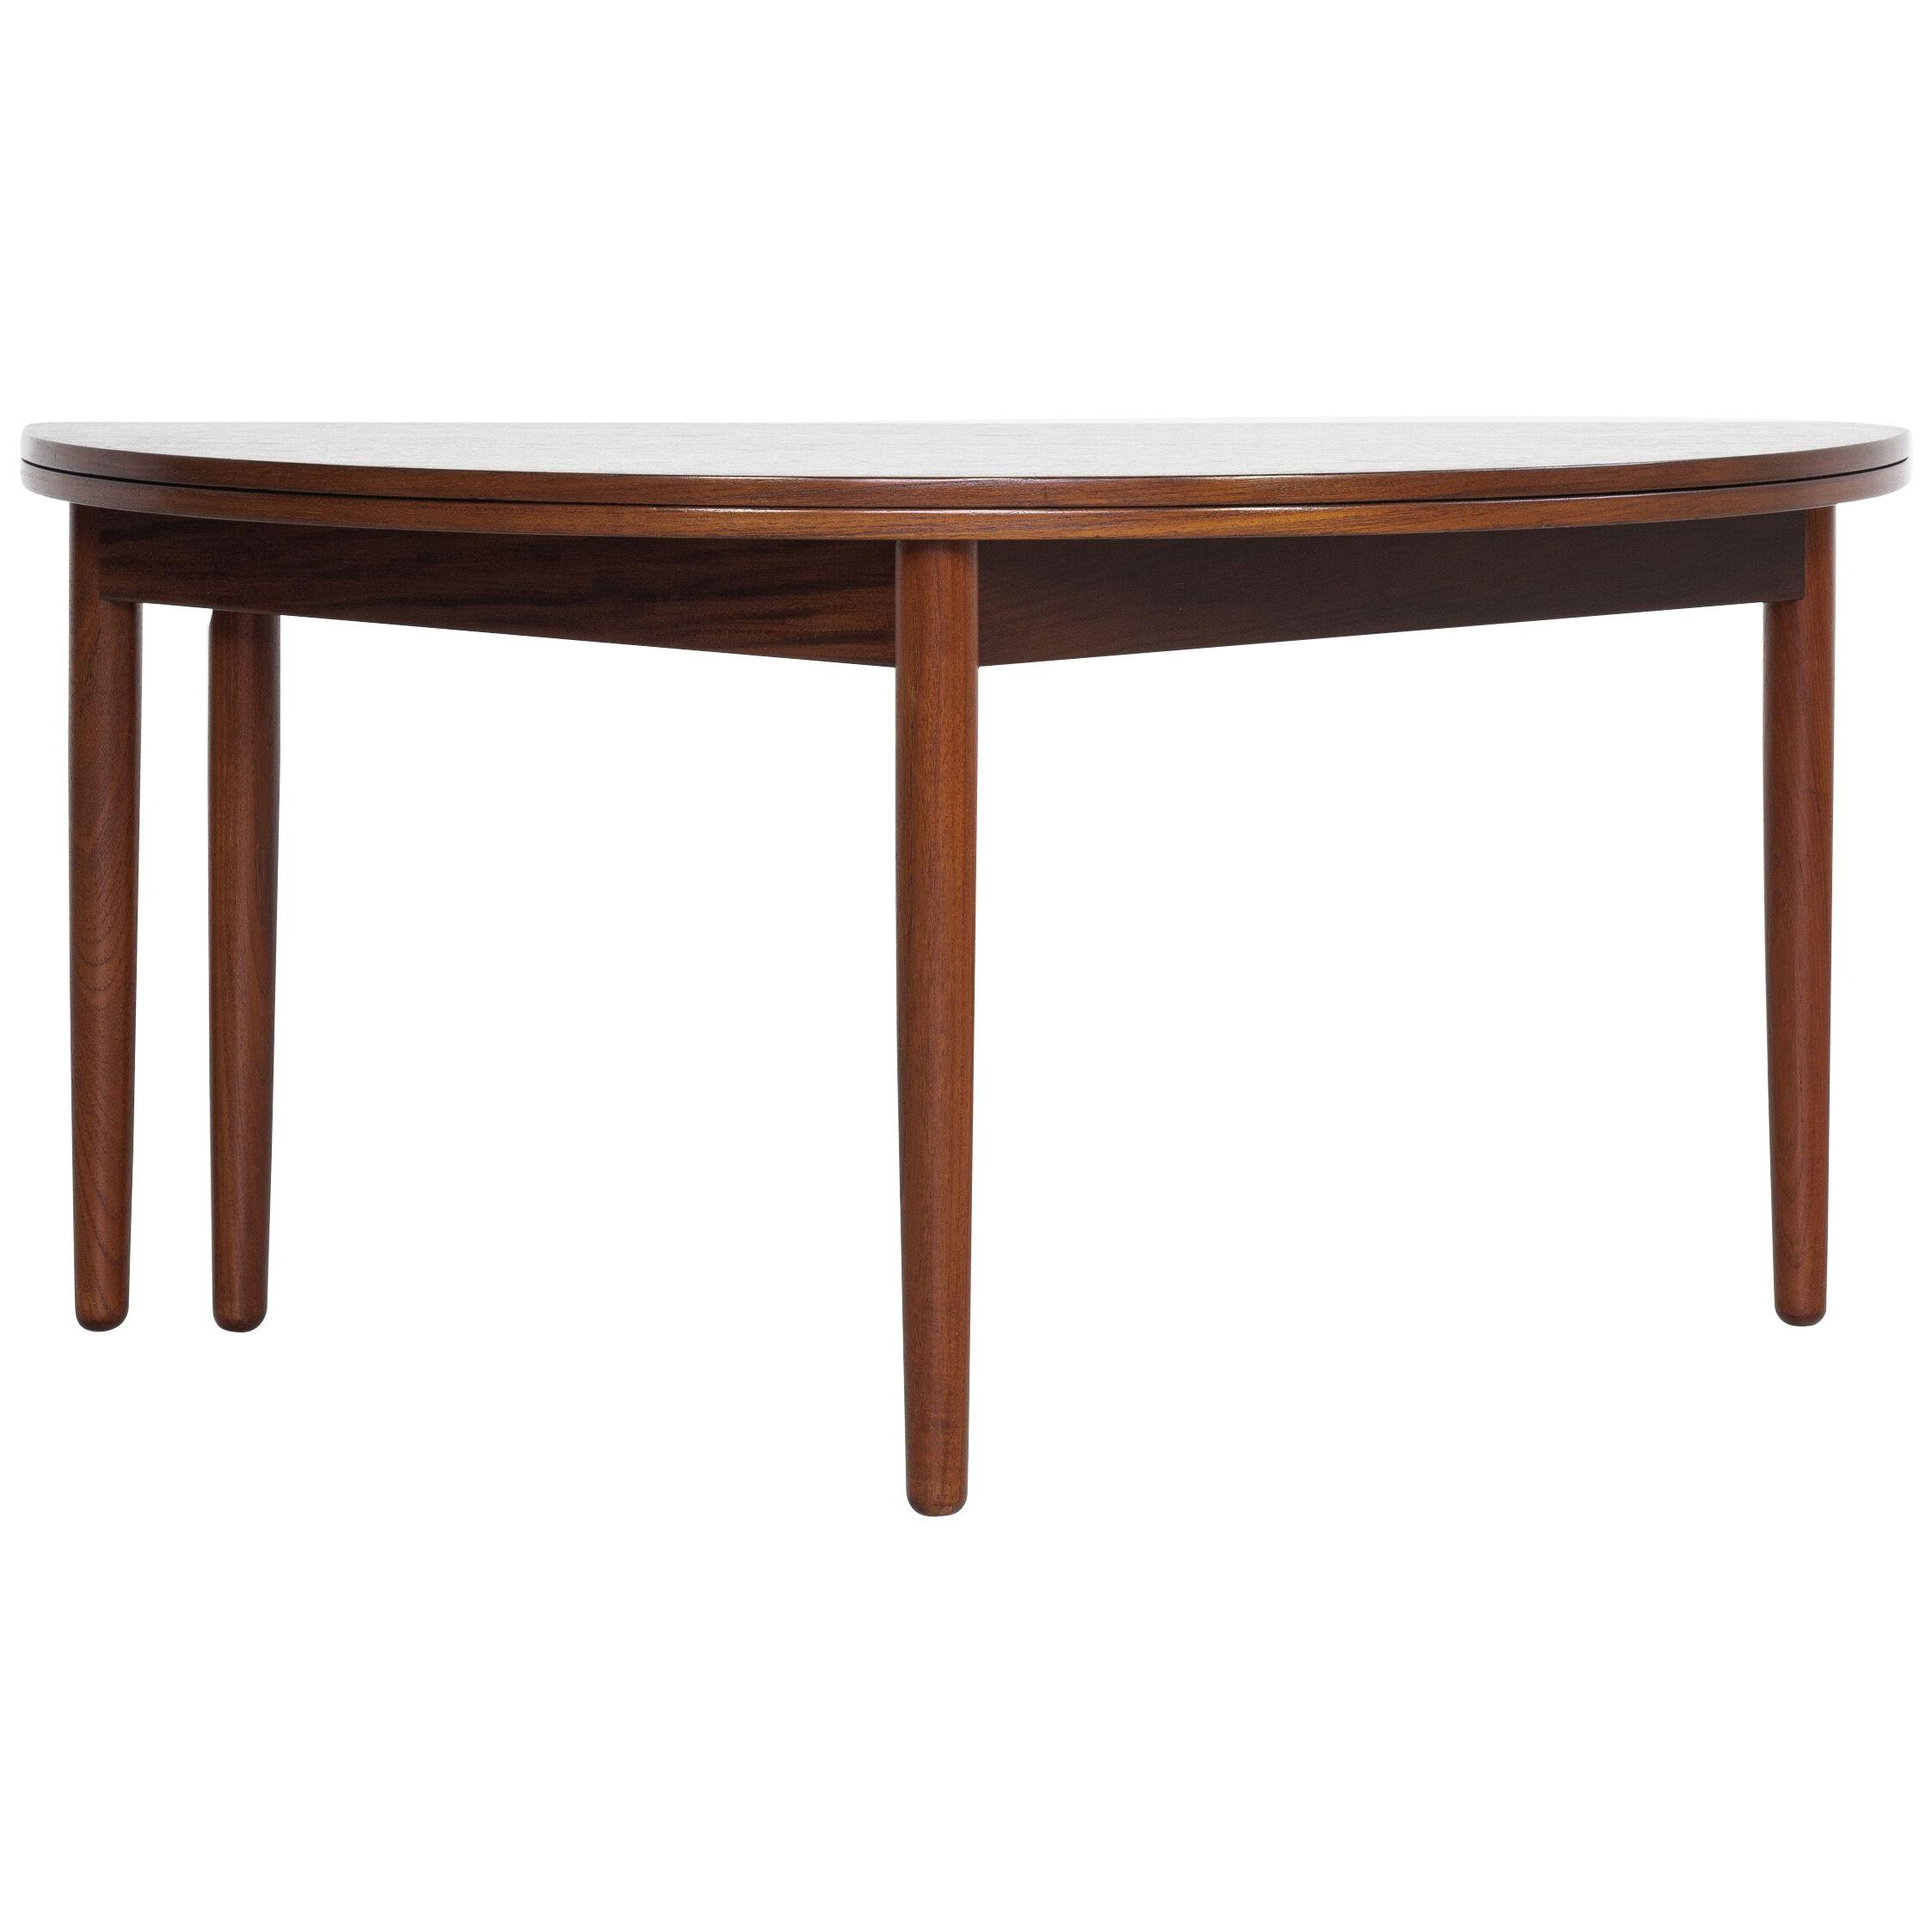 Midcentury Danish console & coffee table in teak by Poul Volther for Frem Røjle